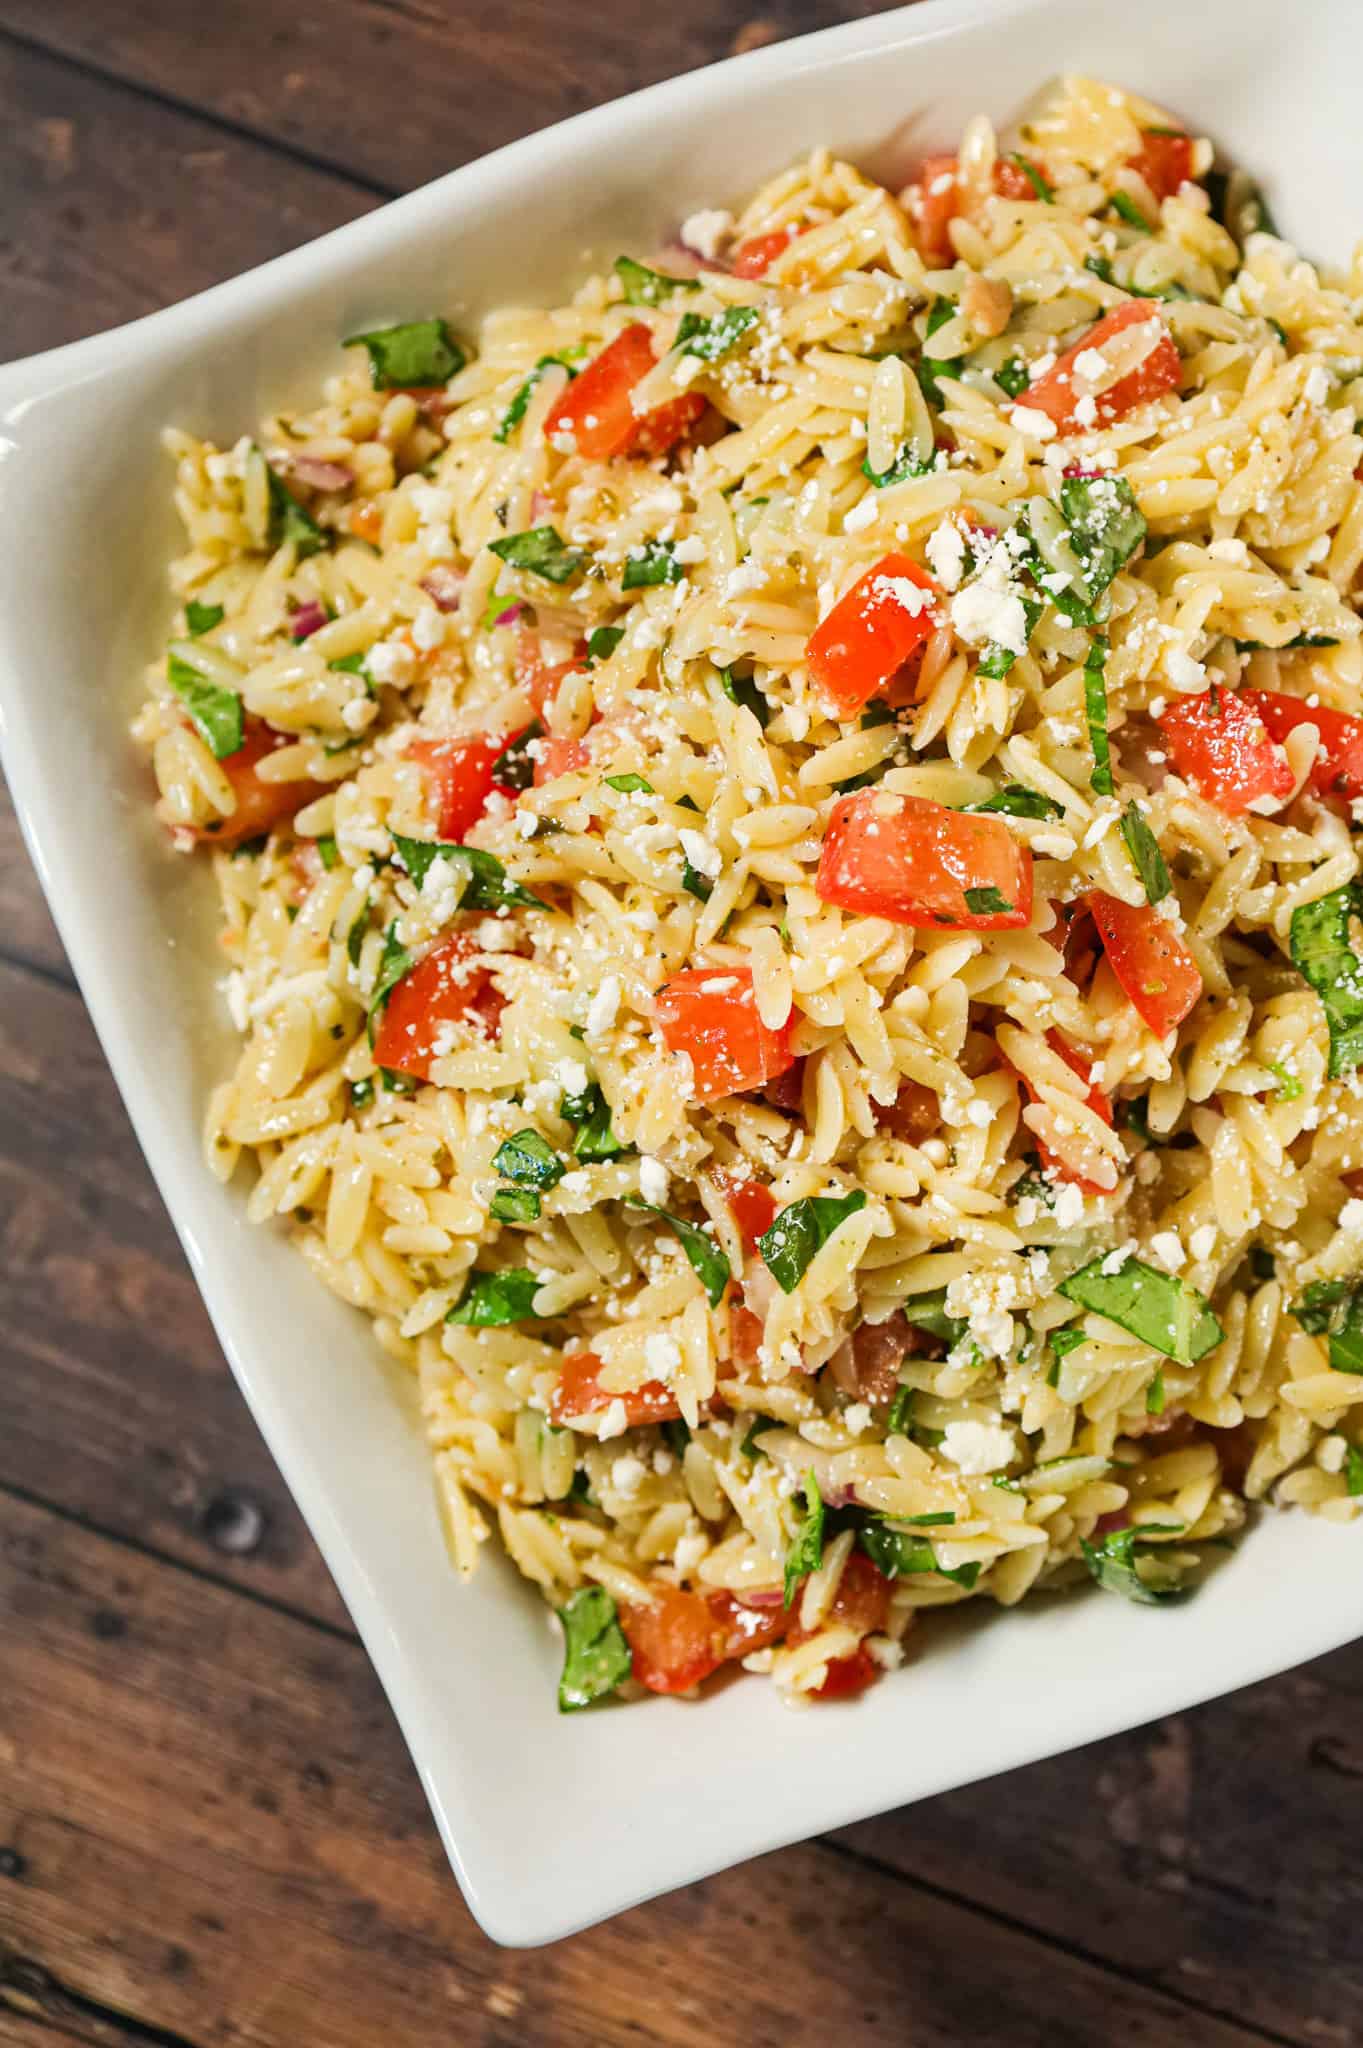 Bruschetta Orzo Pasta Salad is a tasty side dish recipe loaded with fresh diced tomatoes, red onions, fresh basil, garlic and feta cheese.